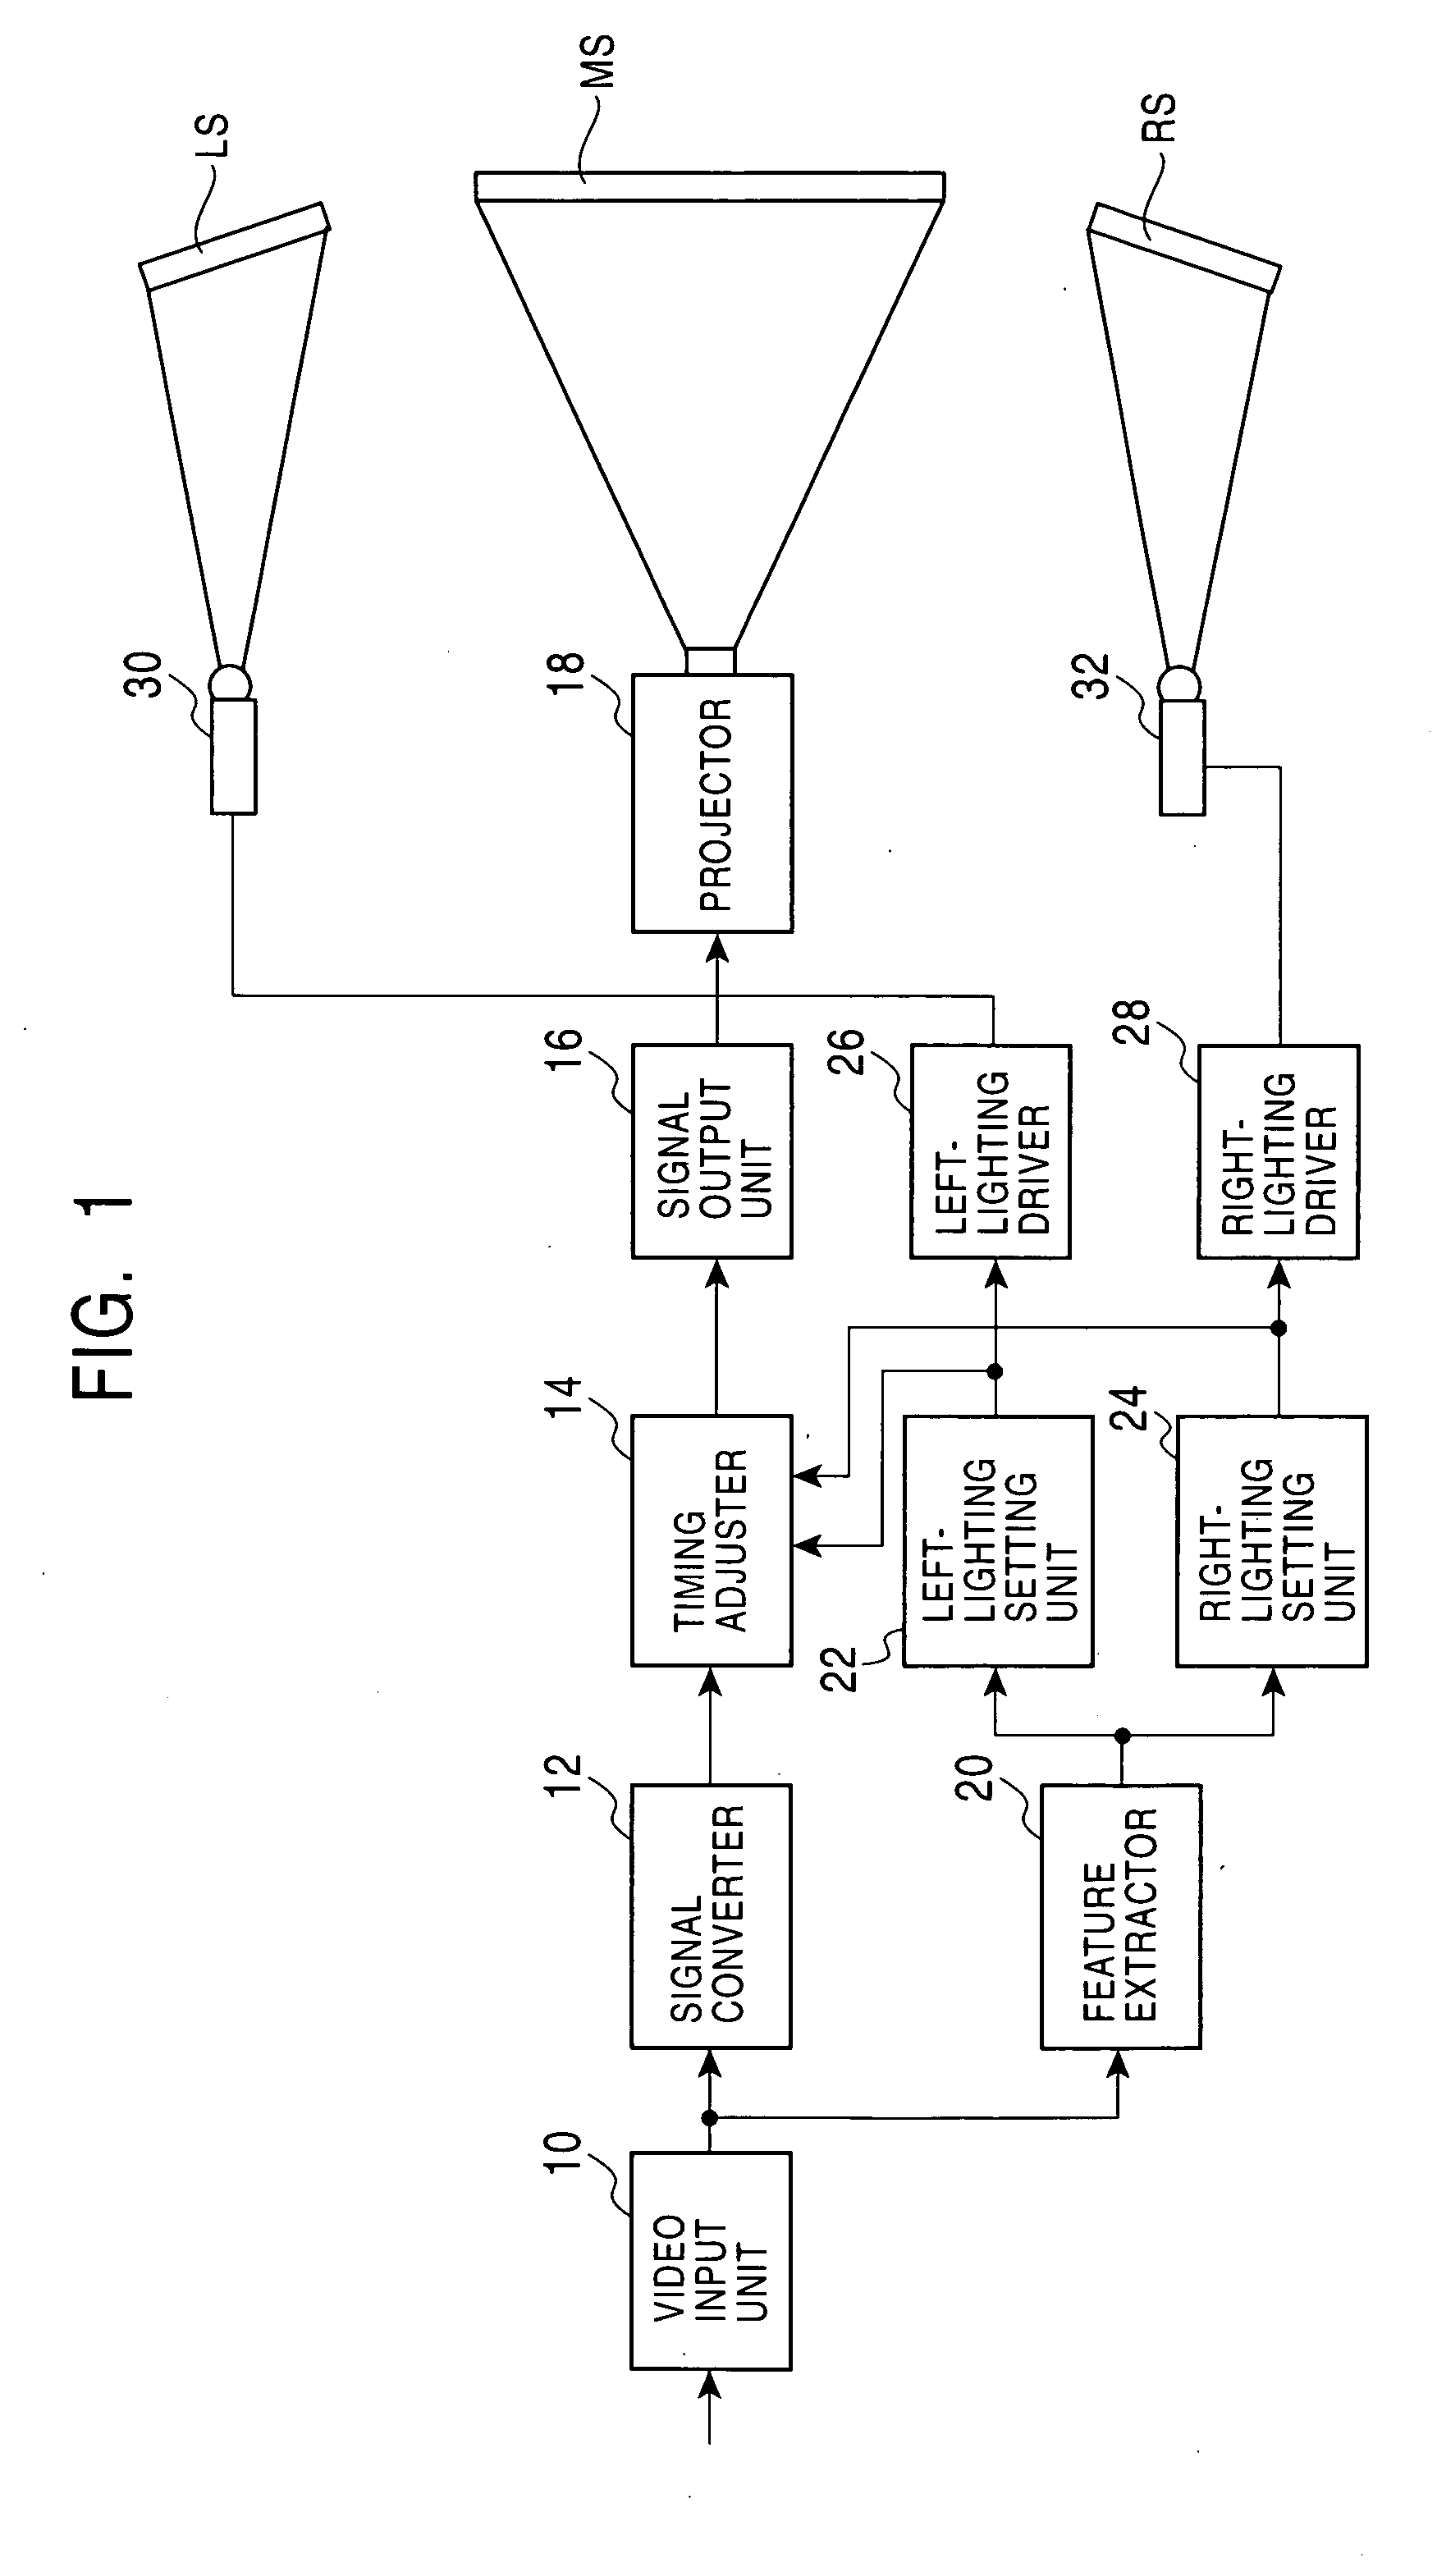 Video output device and method